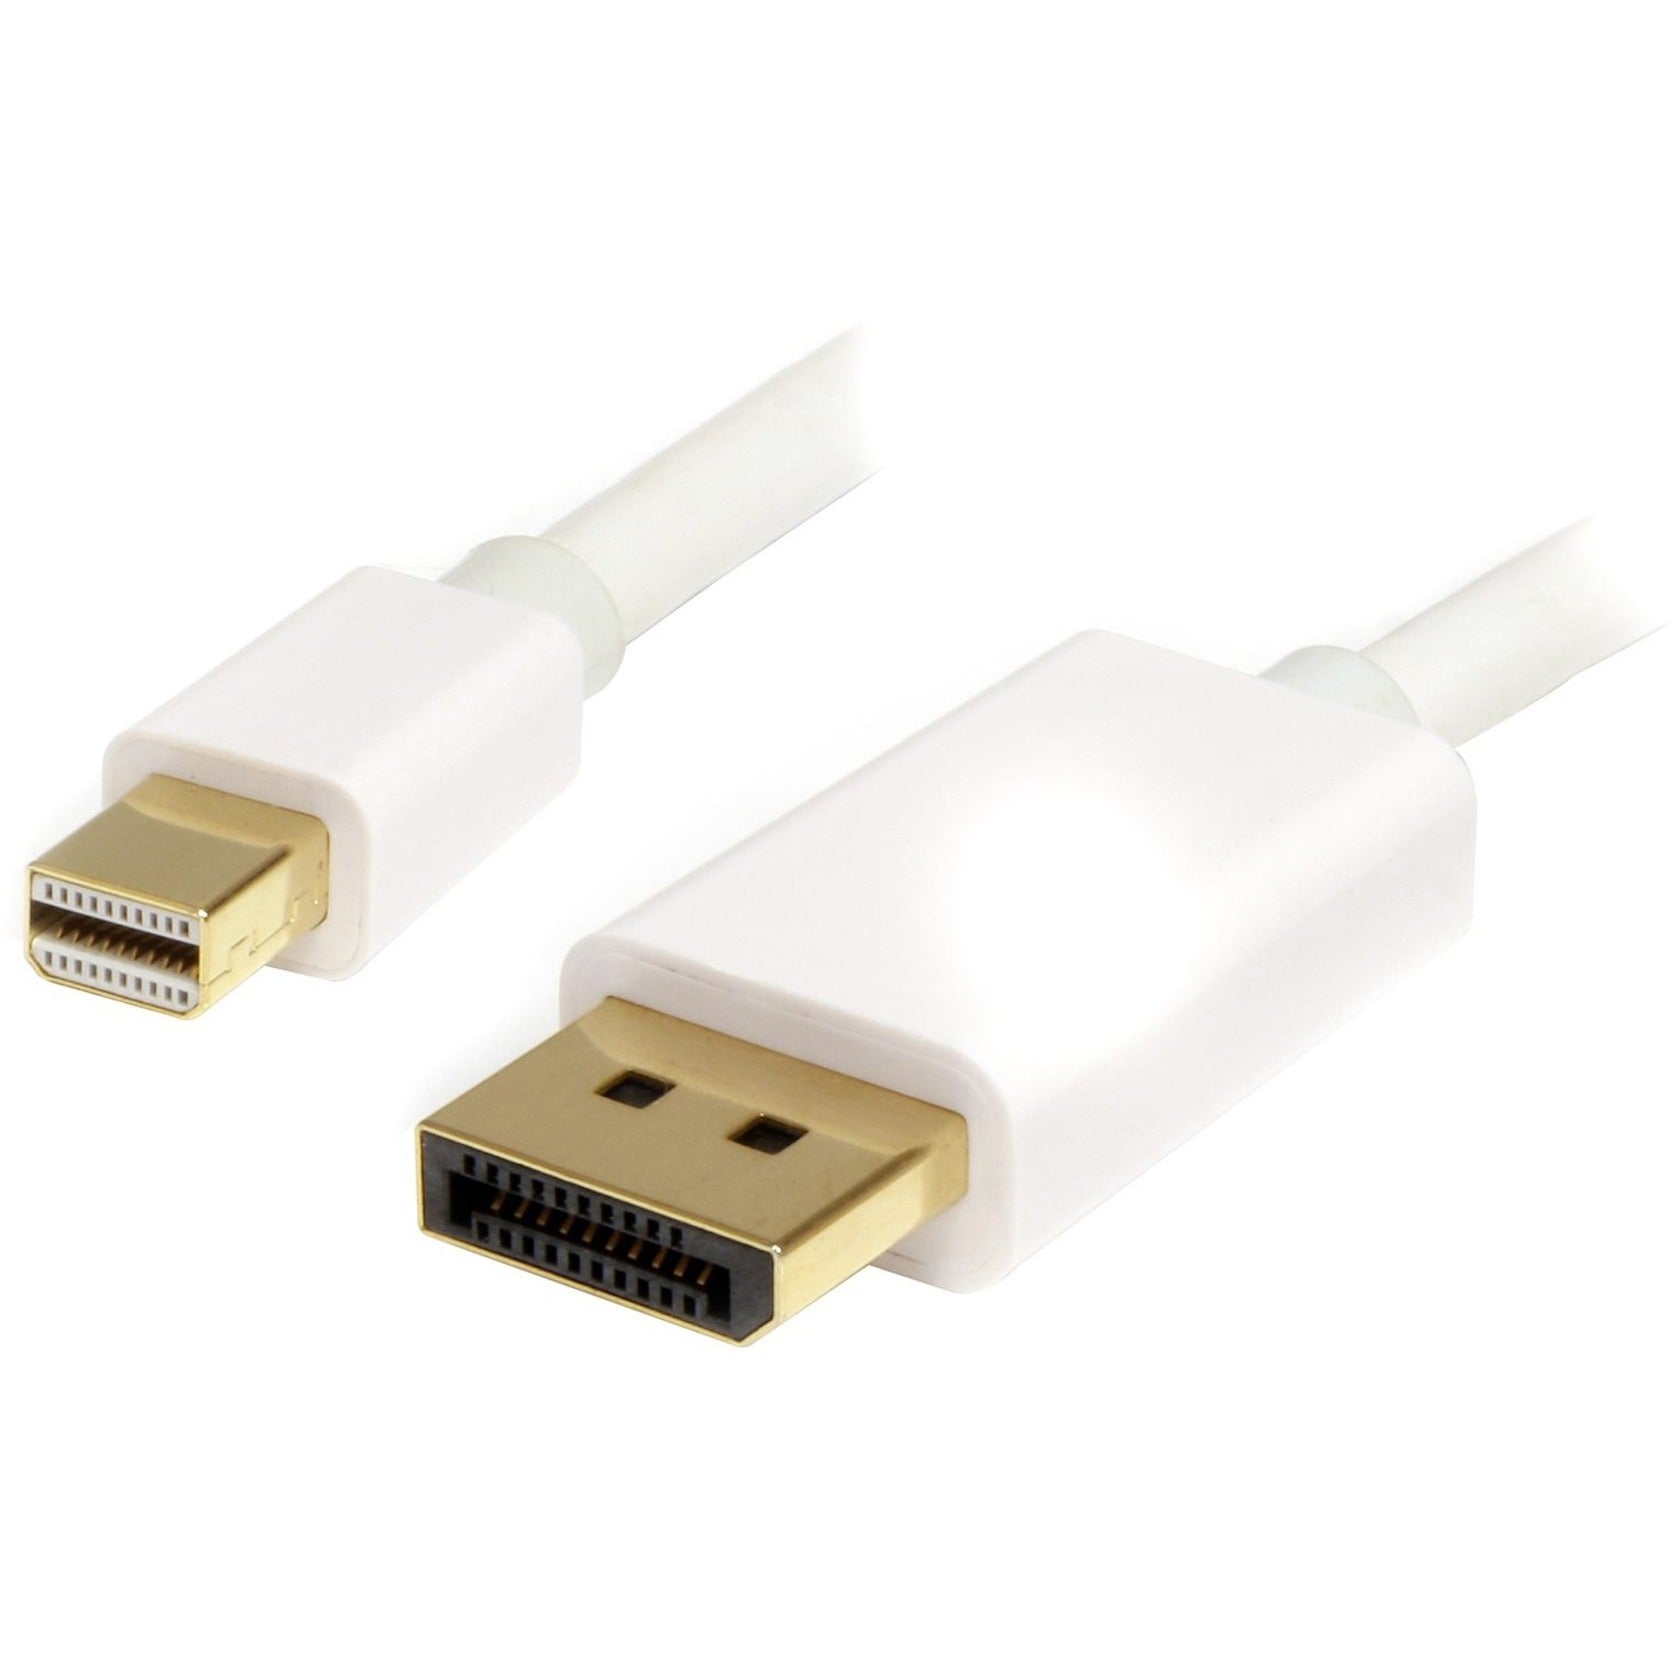 StarTech.com MDP2DPMM1MW Mini DisplayPort to DisplayPort Cable, 3.28 ft, Damage Resistant, Gold Plated, 21.6 Gbit/s